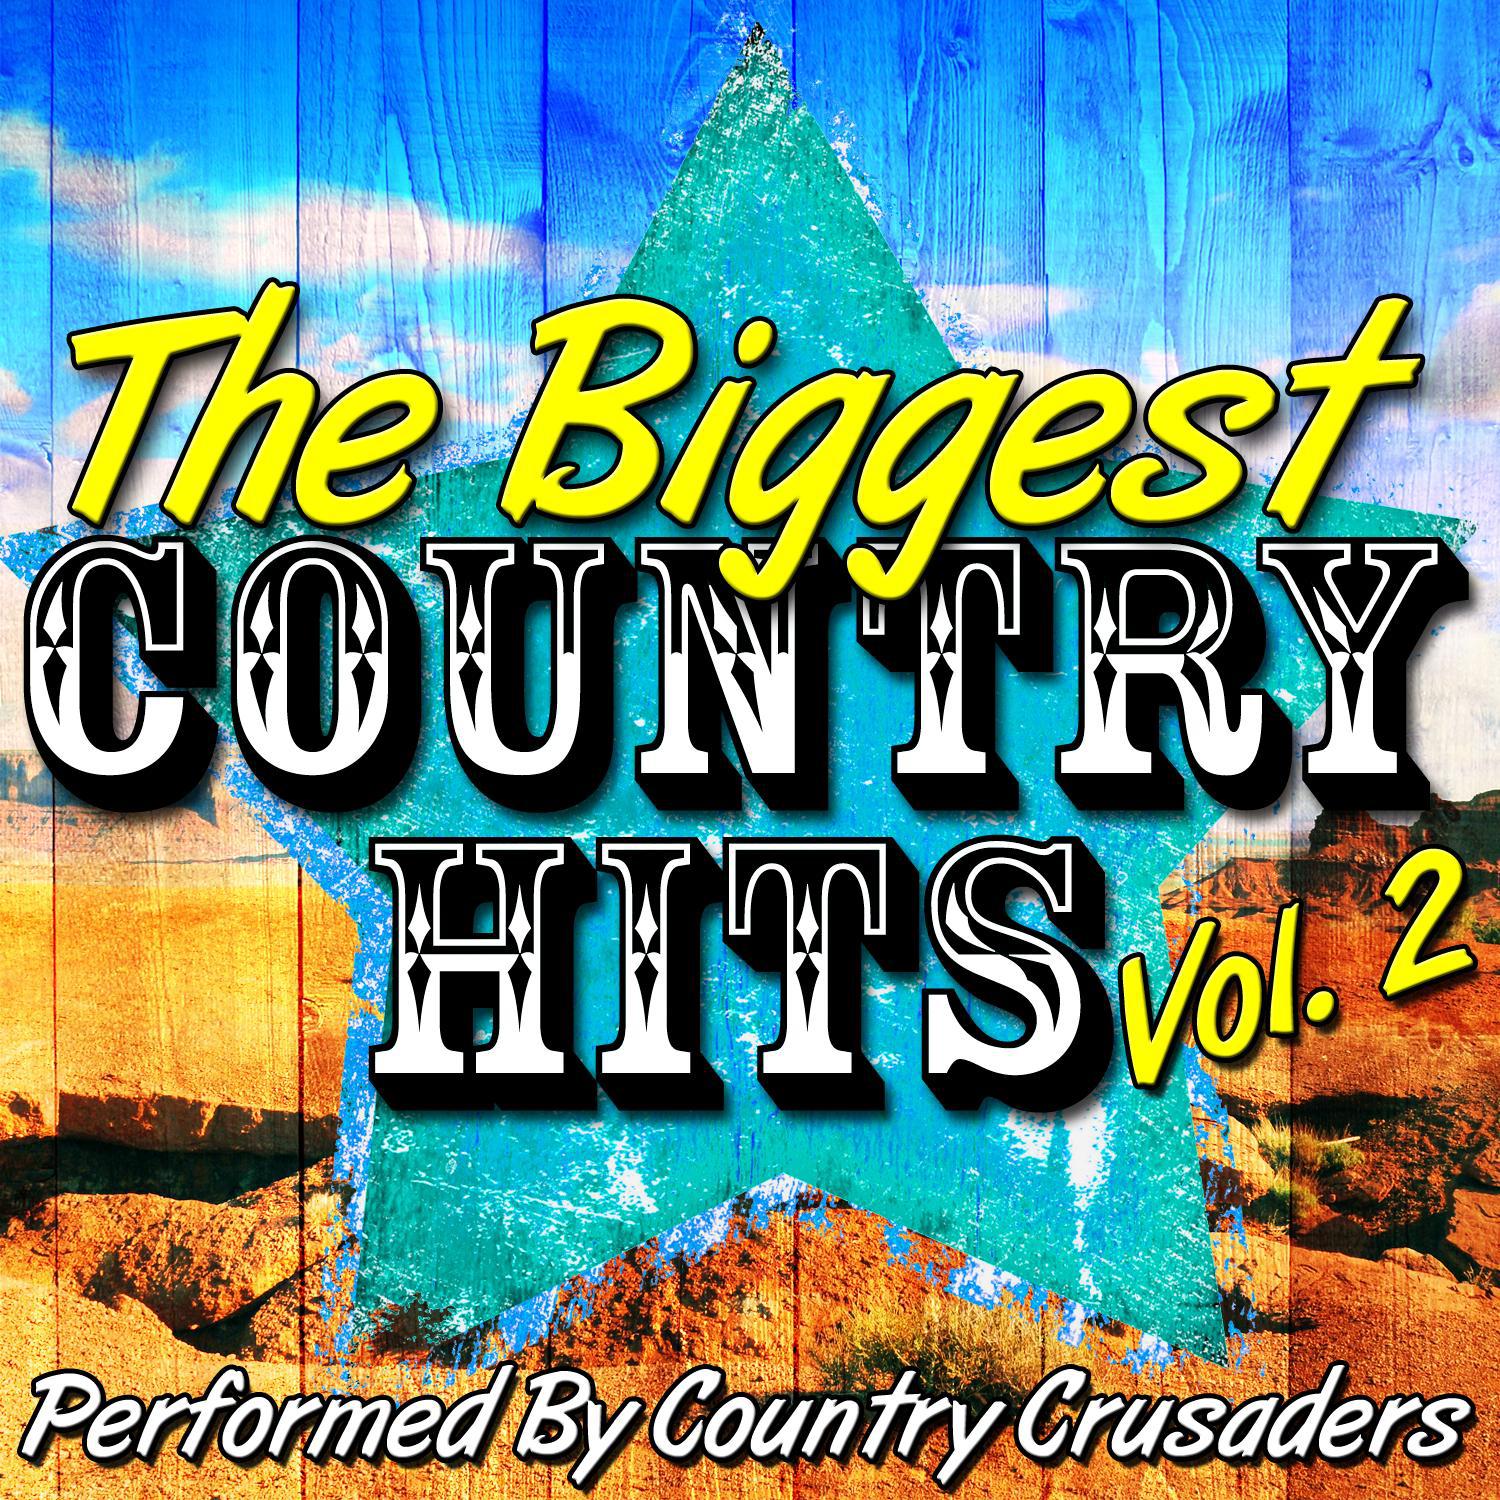 The Biggest Country Hits Vol. 2